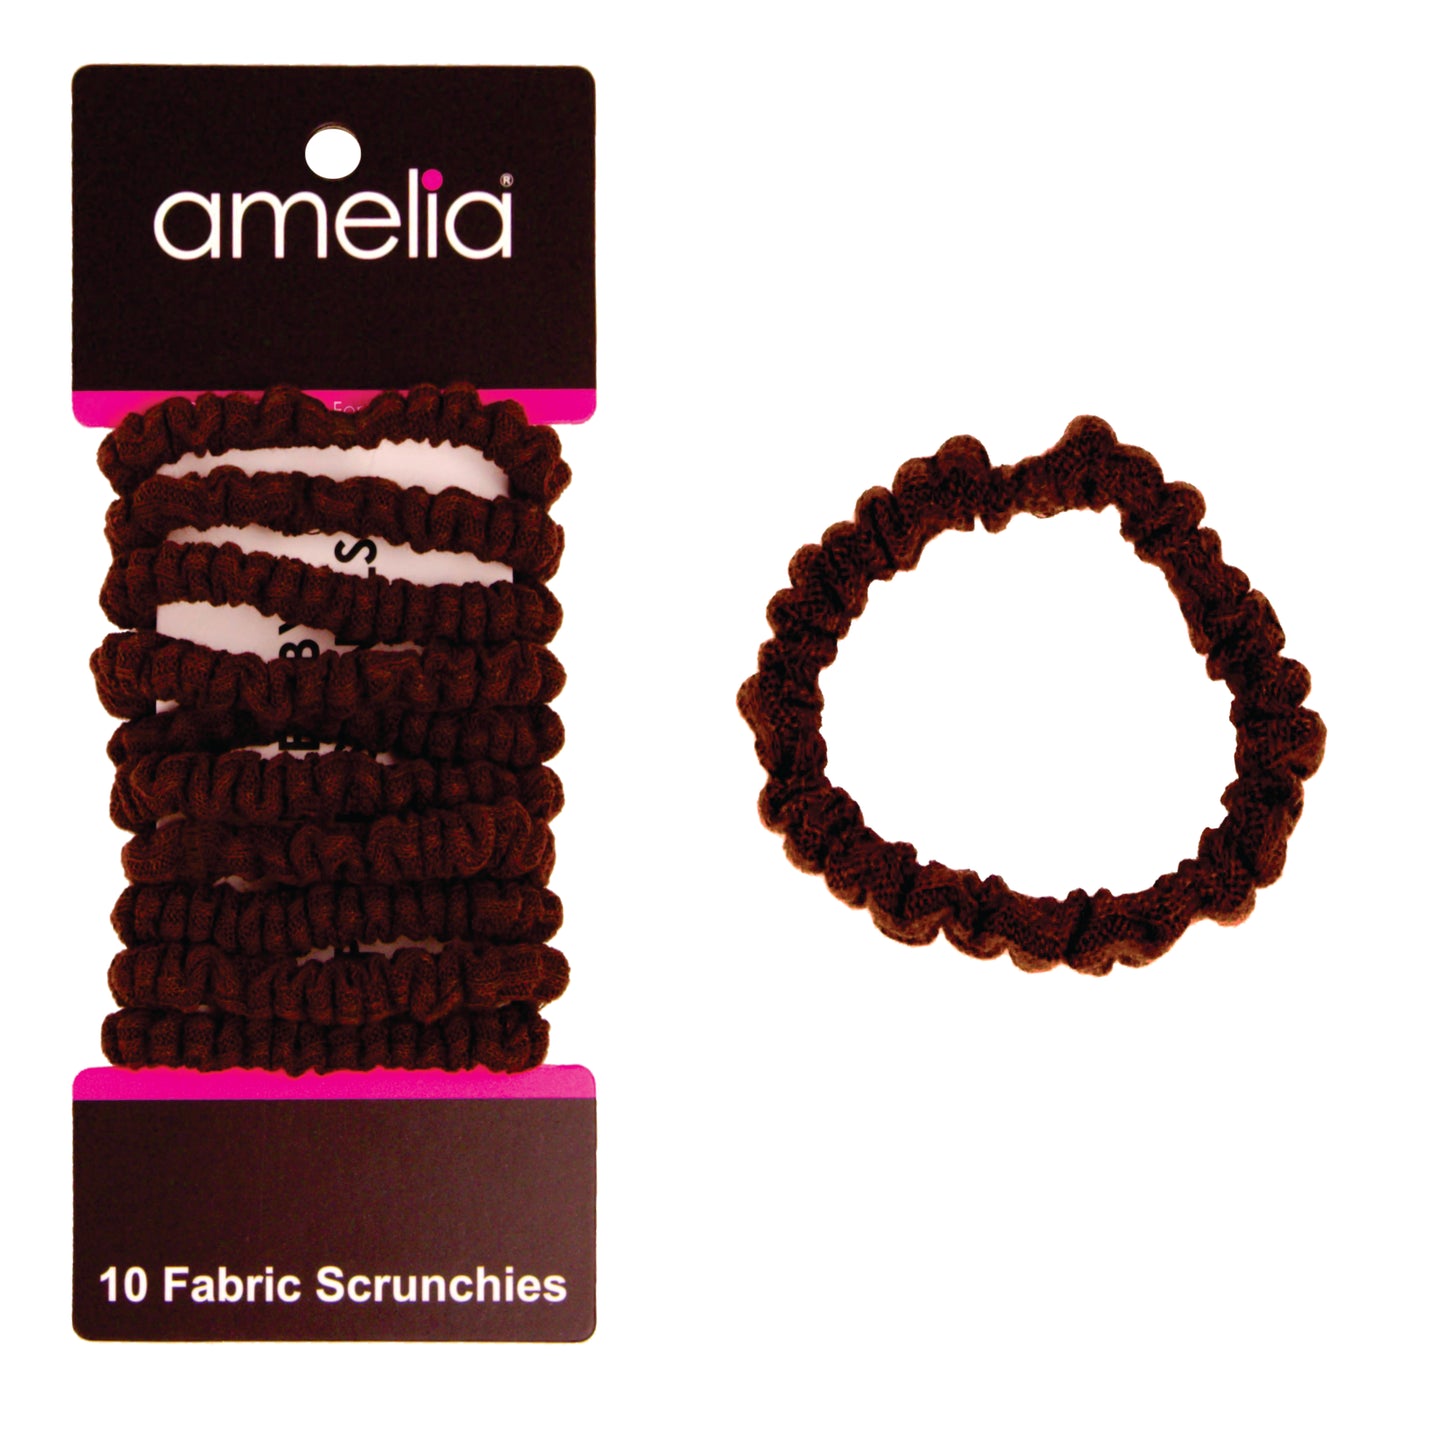 Amelia Beauty, Brown Ribbed Scrunchies, 2.25in Diameter, Gentle on Hair, Strong Hold, No Snag, No Dents or Creases. 10 Pack